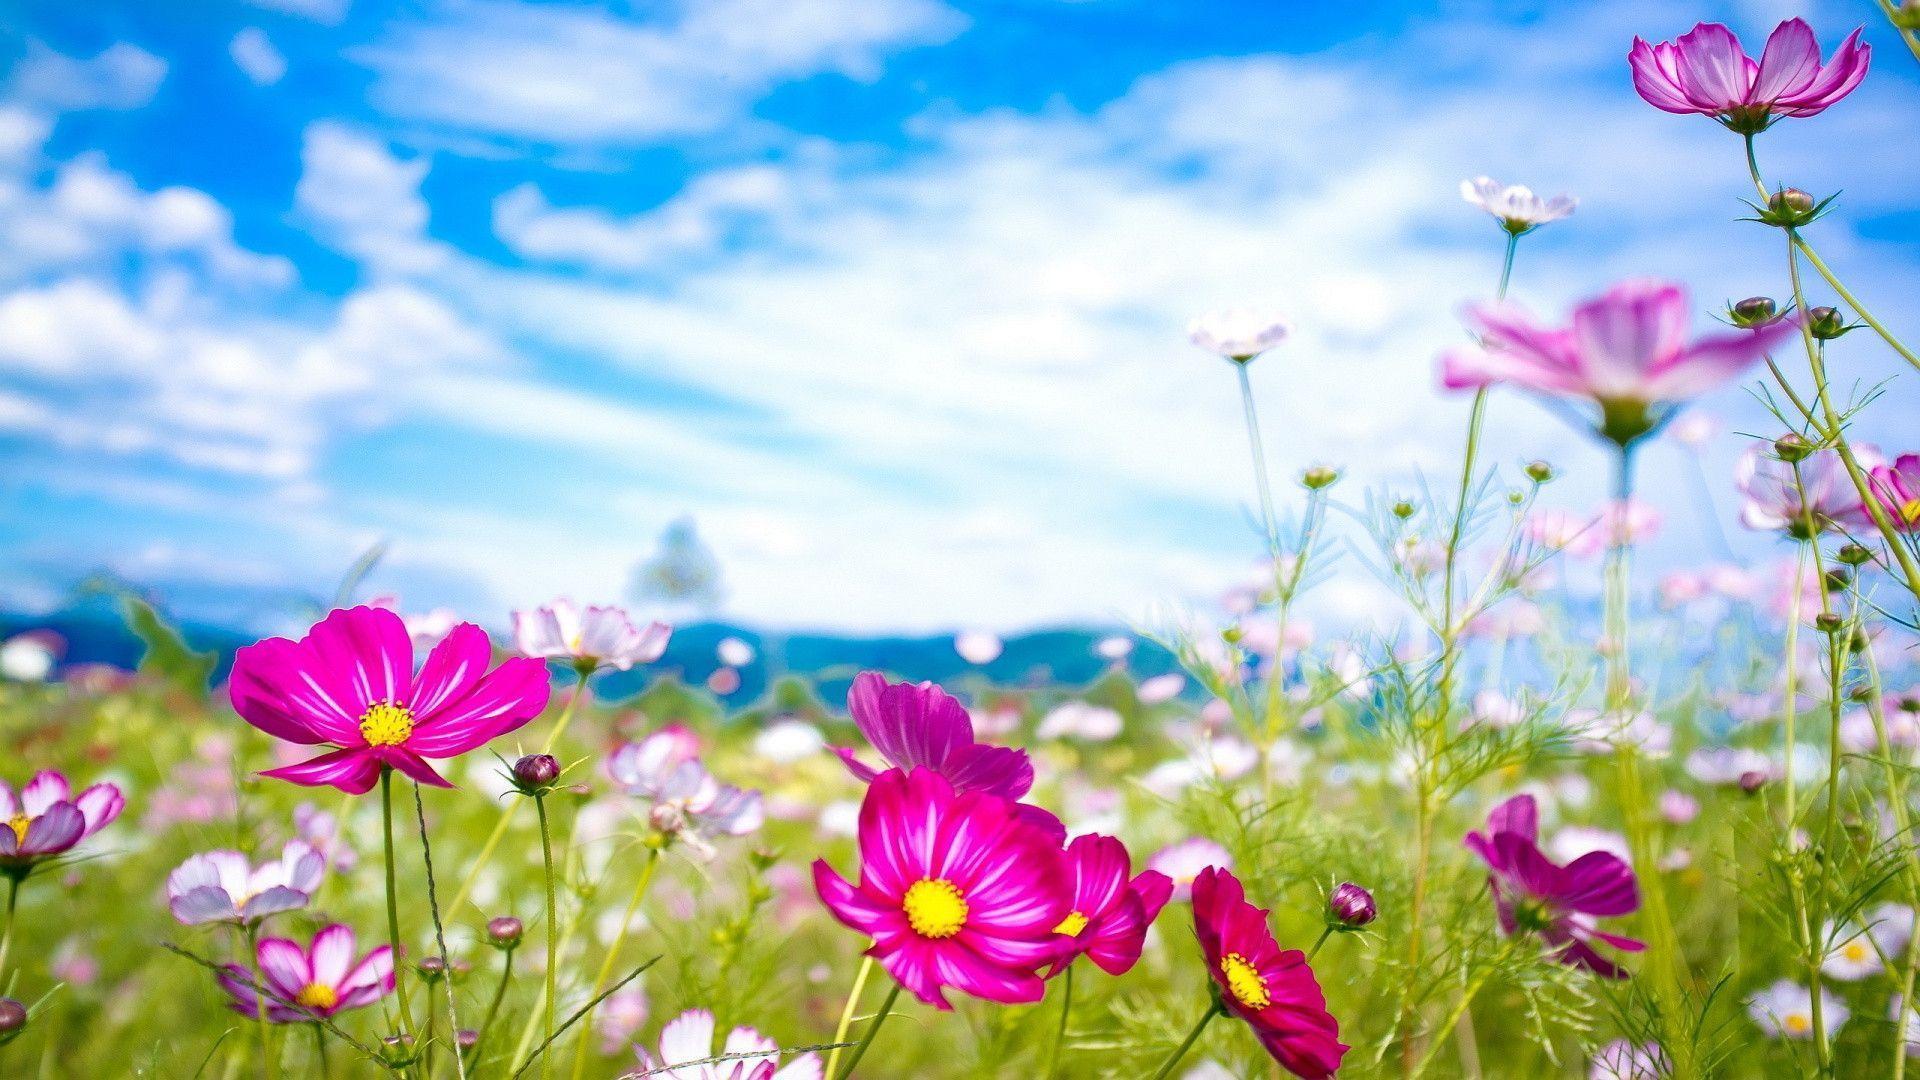 Summer Flower Picture Widescreen 2 HD Wallpaper. Hdimges